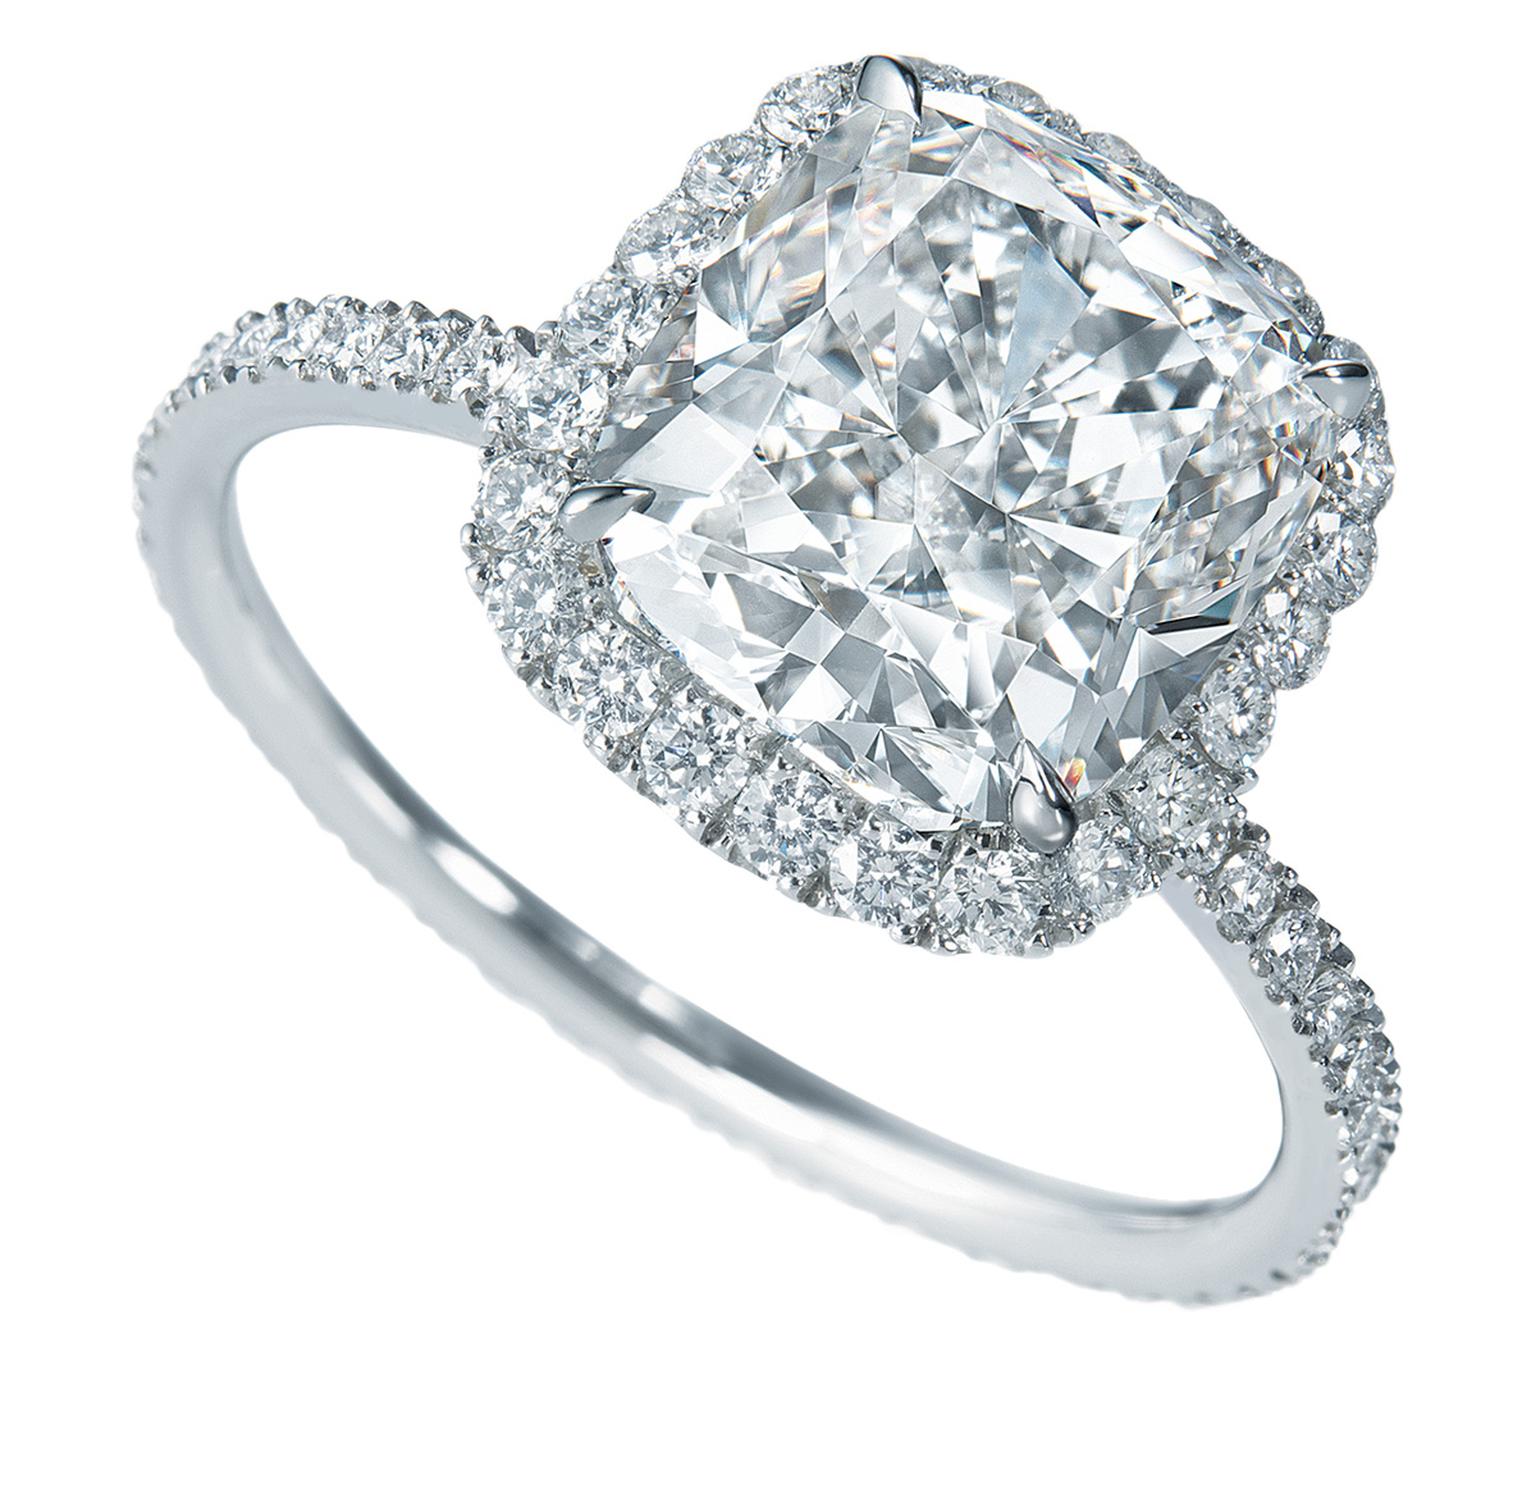 Harry Winston The One engagement ring_20131126_Zoom